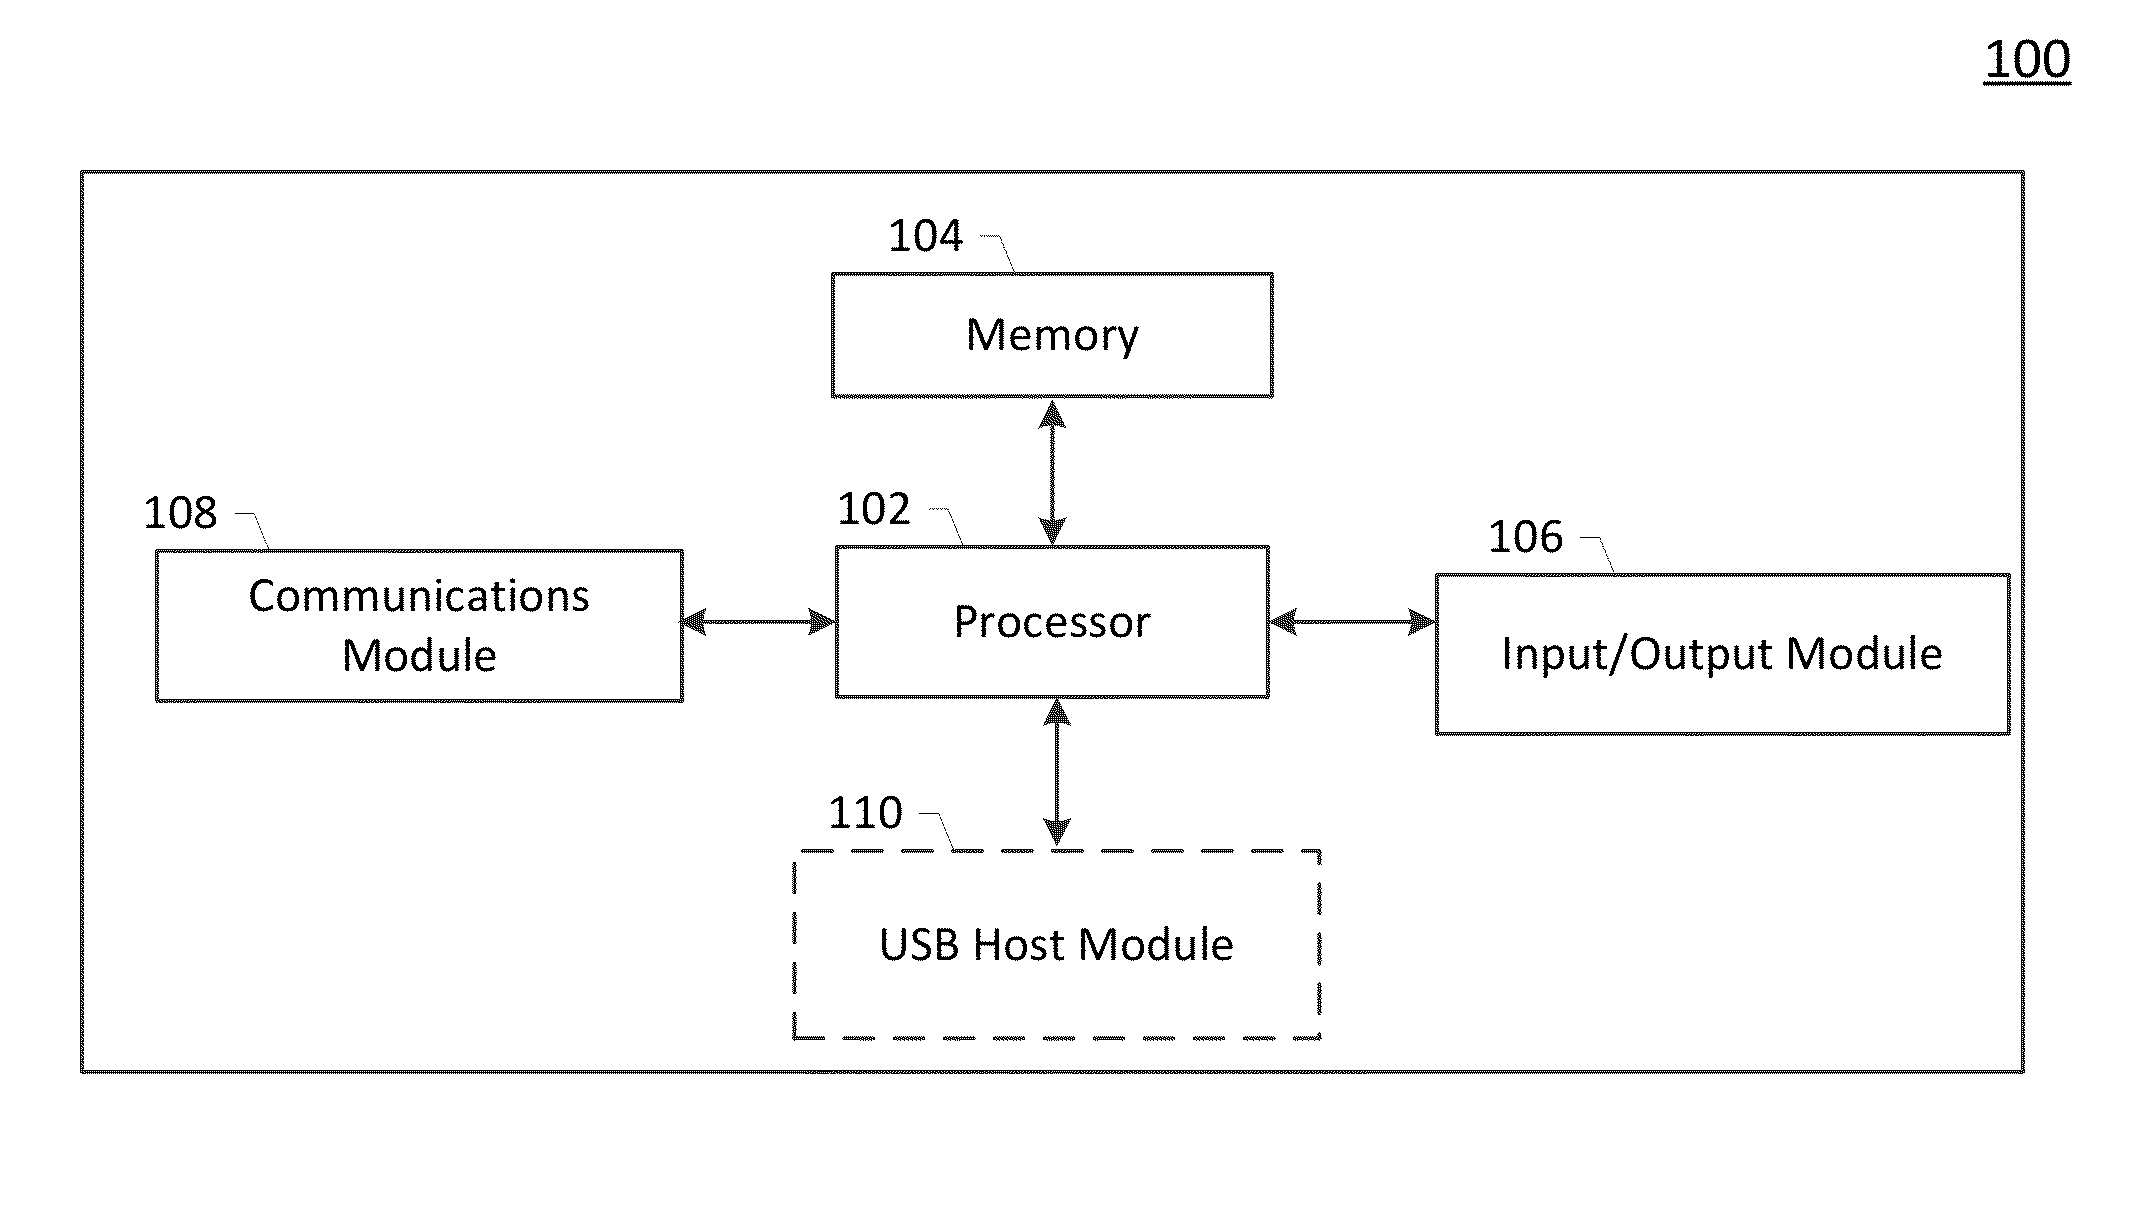 Media processing device with enhanced media processing efficiency and connectivity features